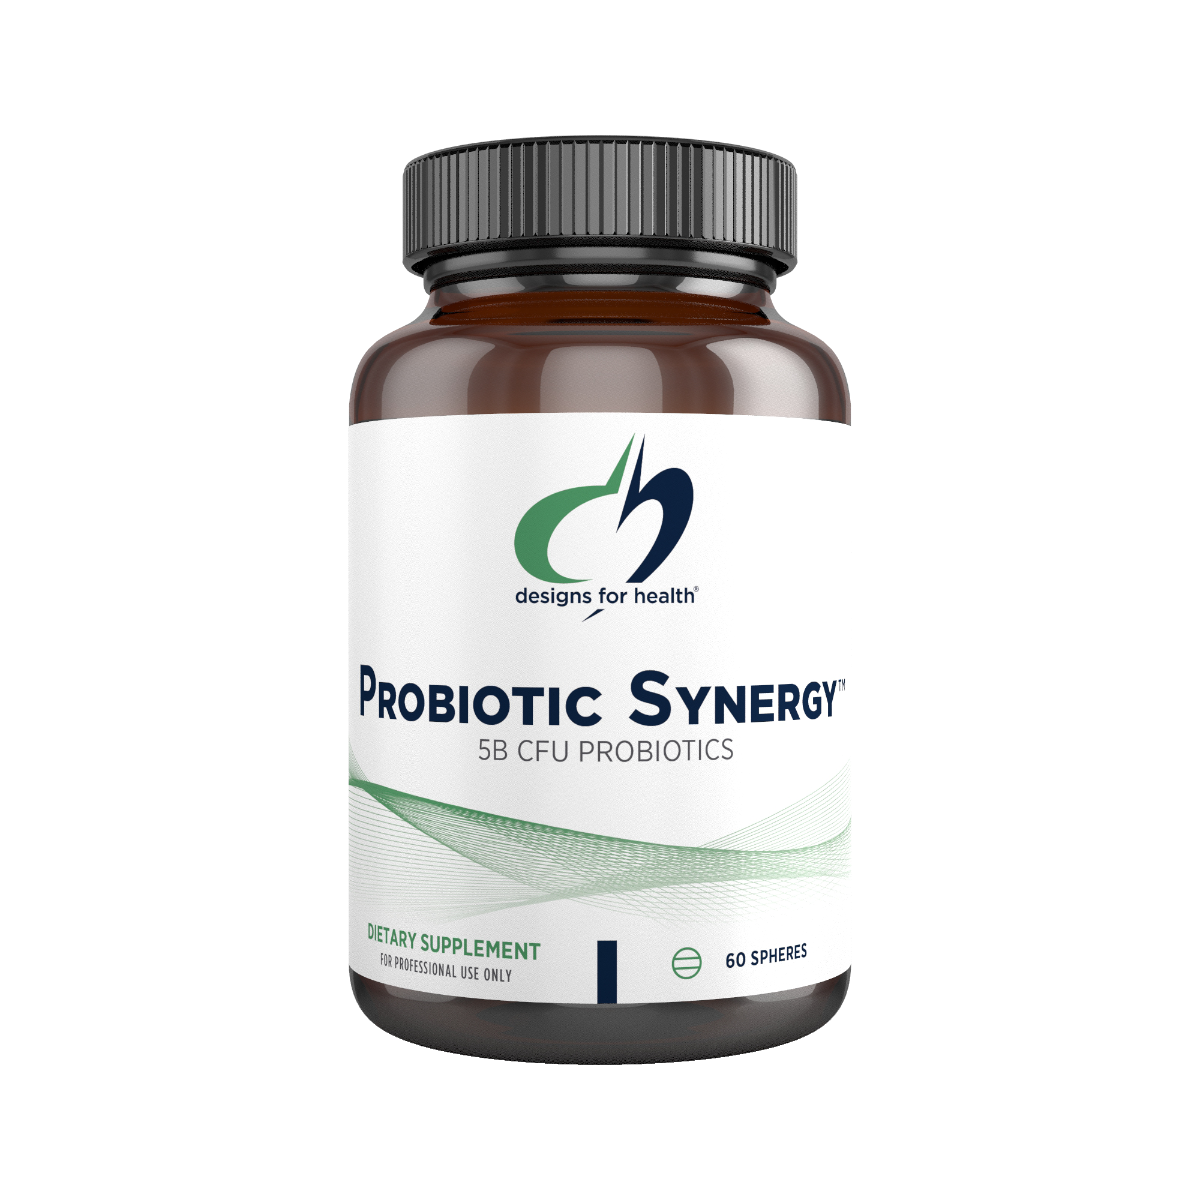 Probiotic Synergy - 60 Spheres | Designs For Health